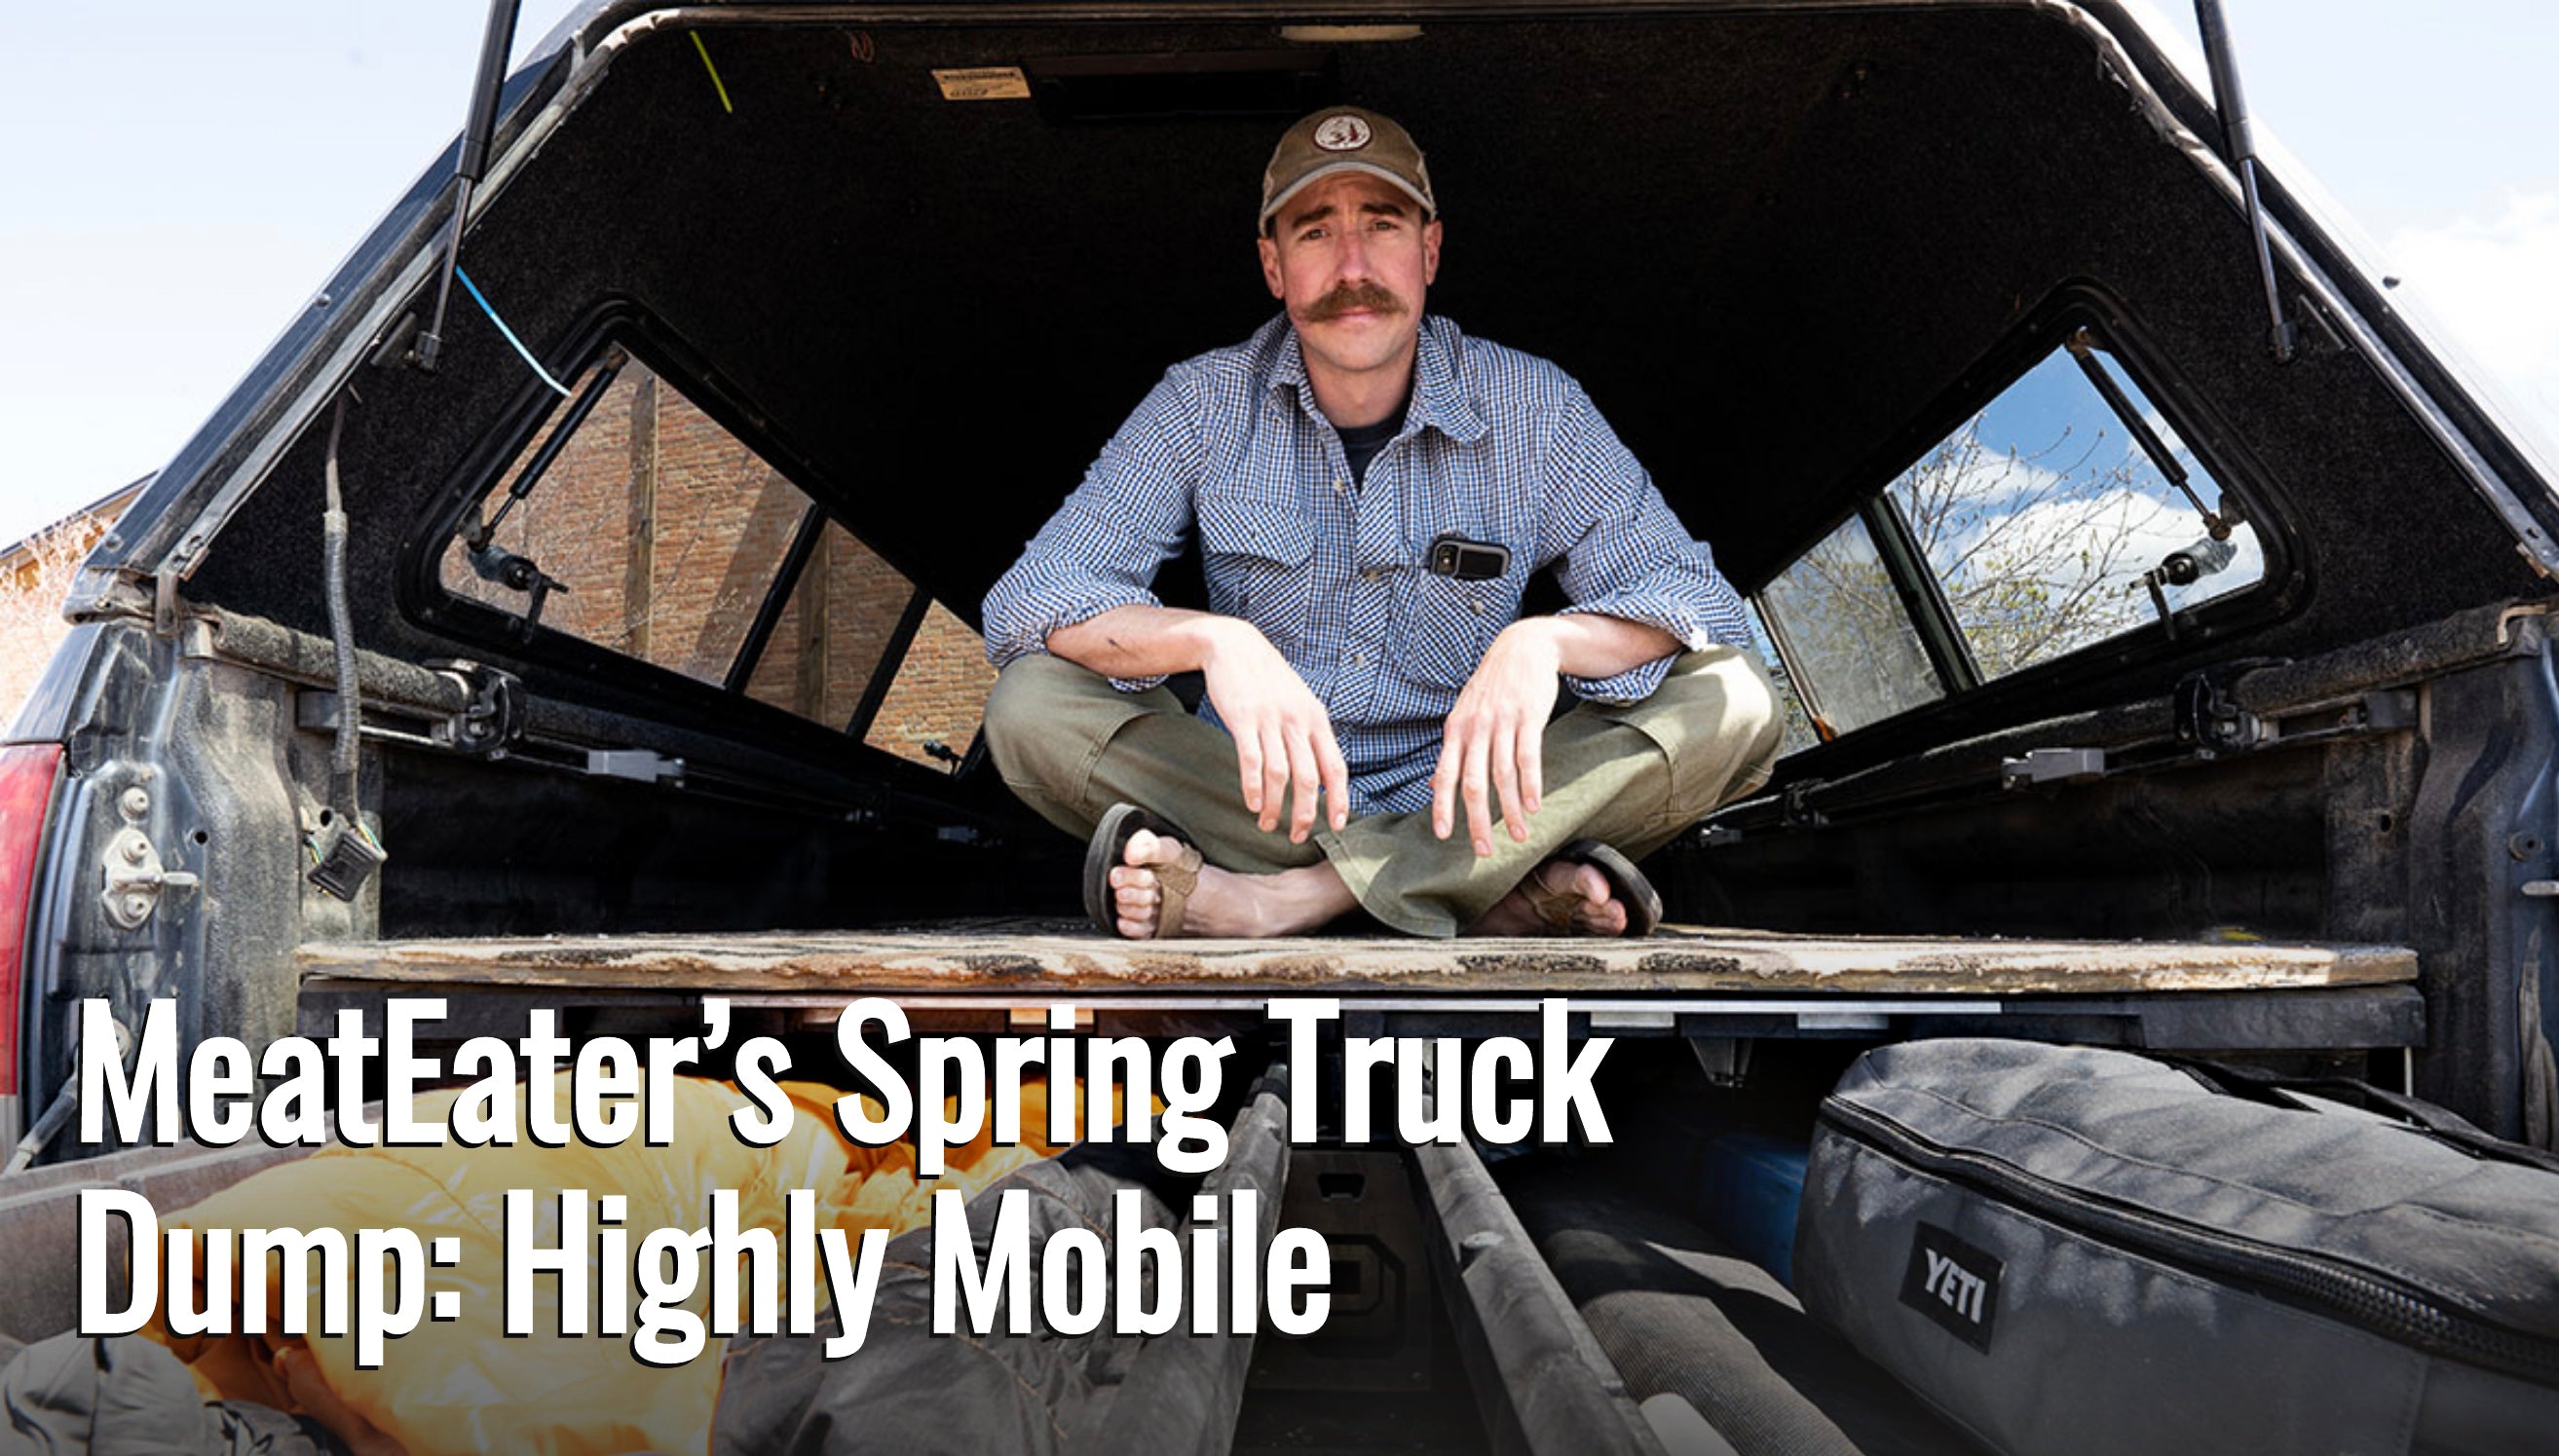 MeatEater’s Spring Truck Dump: Highly Mobile